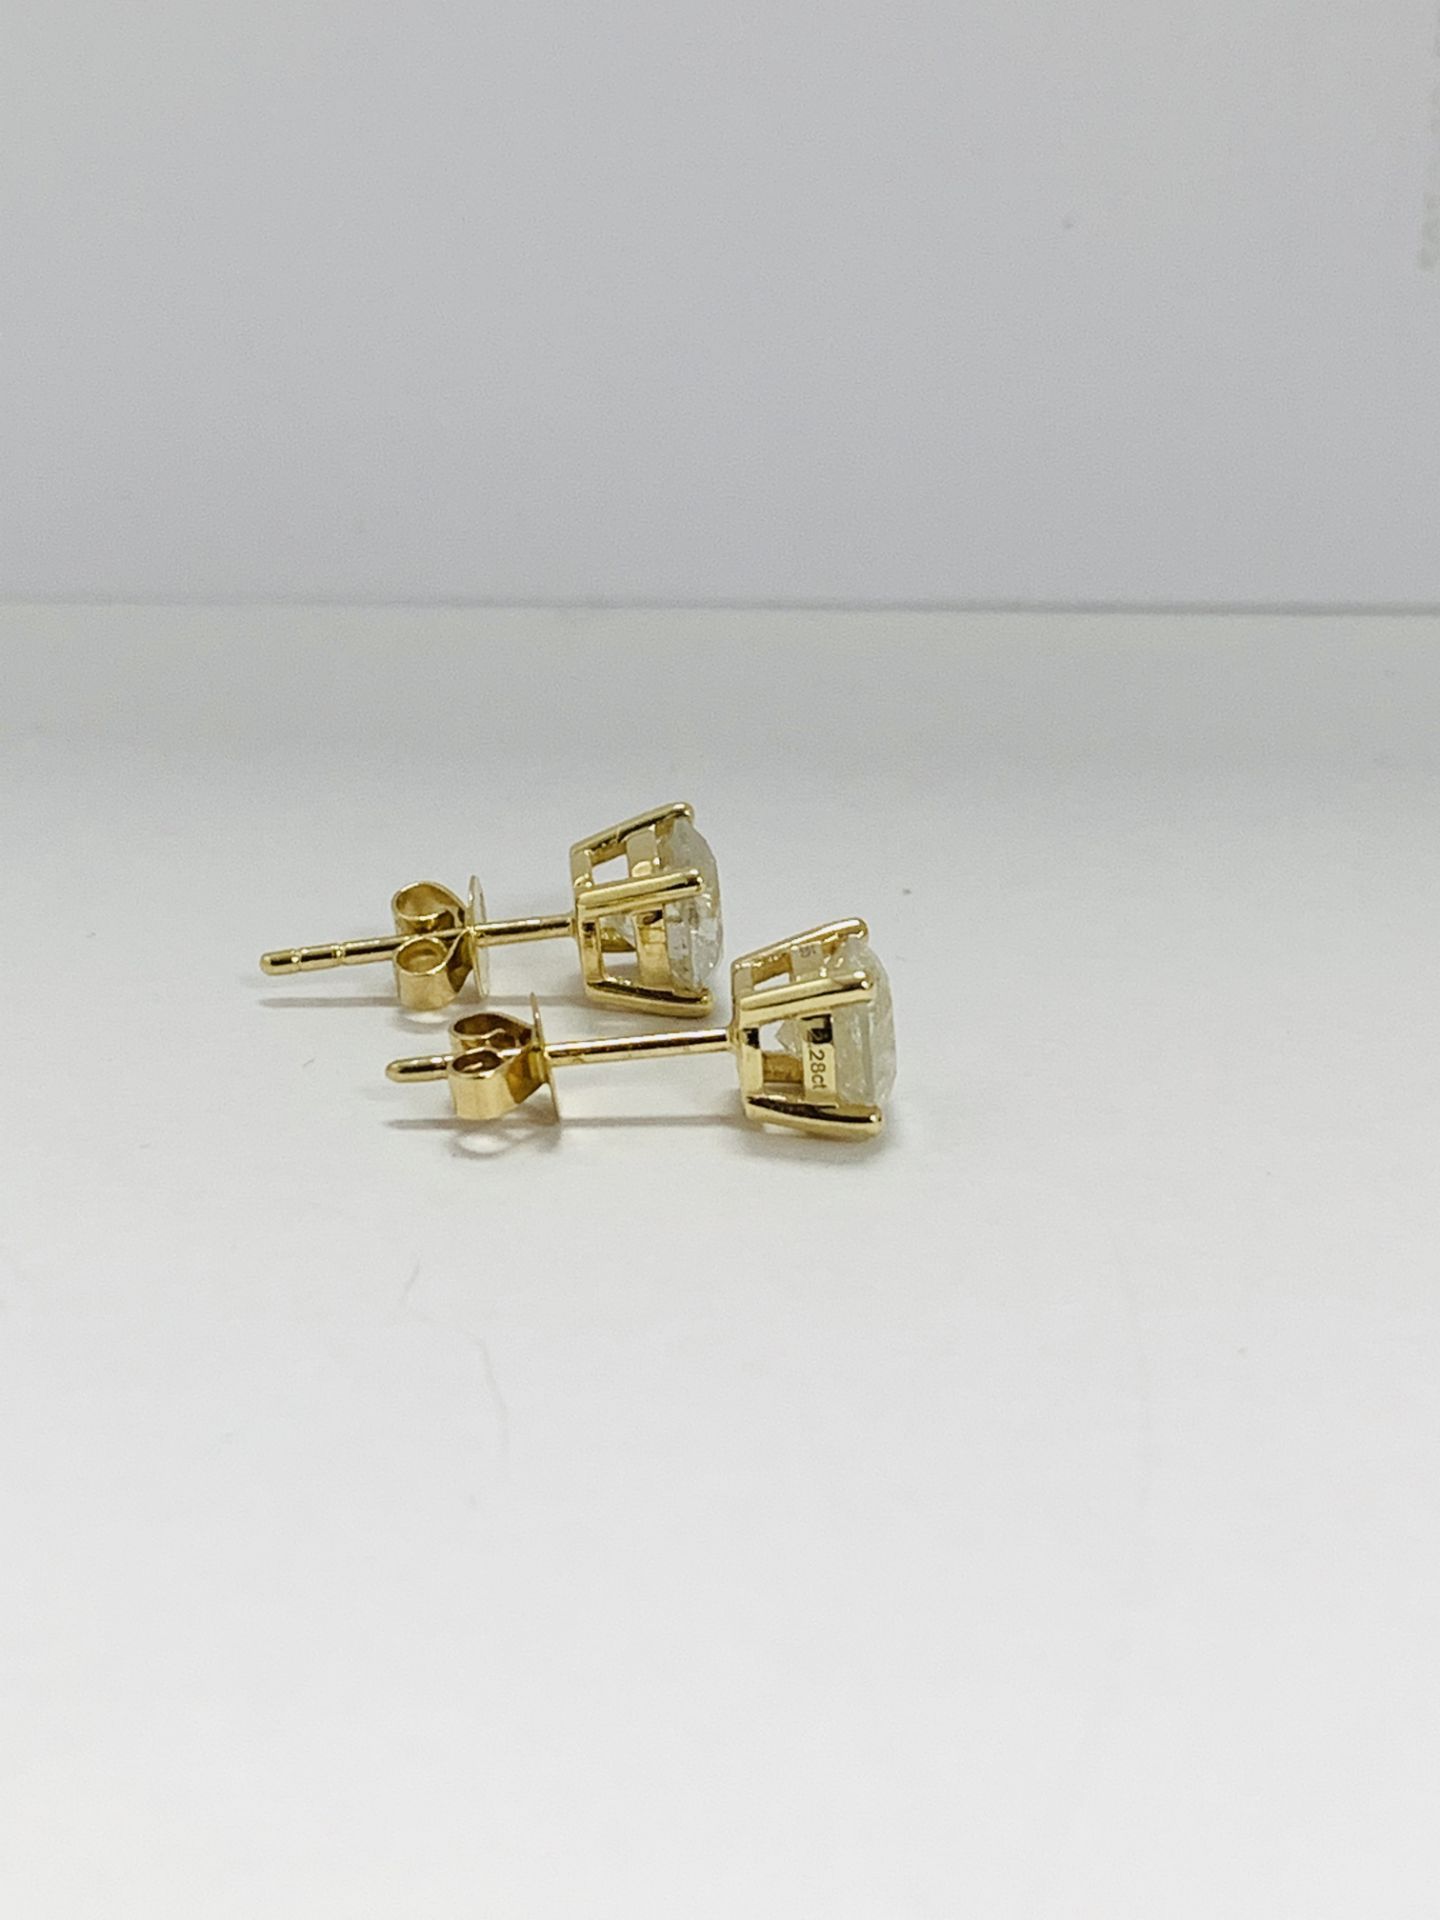 14Ct Yellow Gold Pair Of Earrings - Image 5 of 9